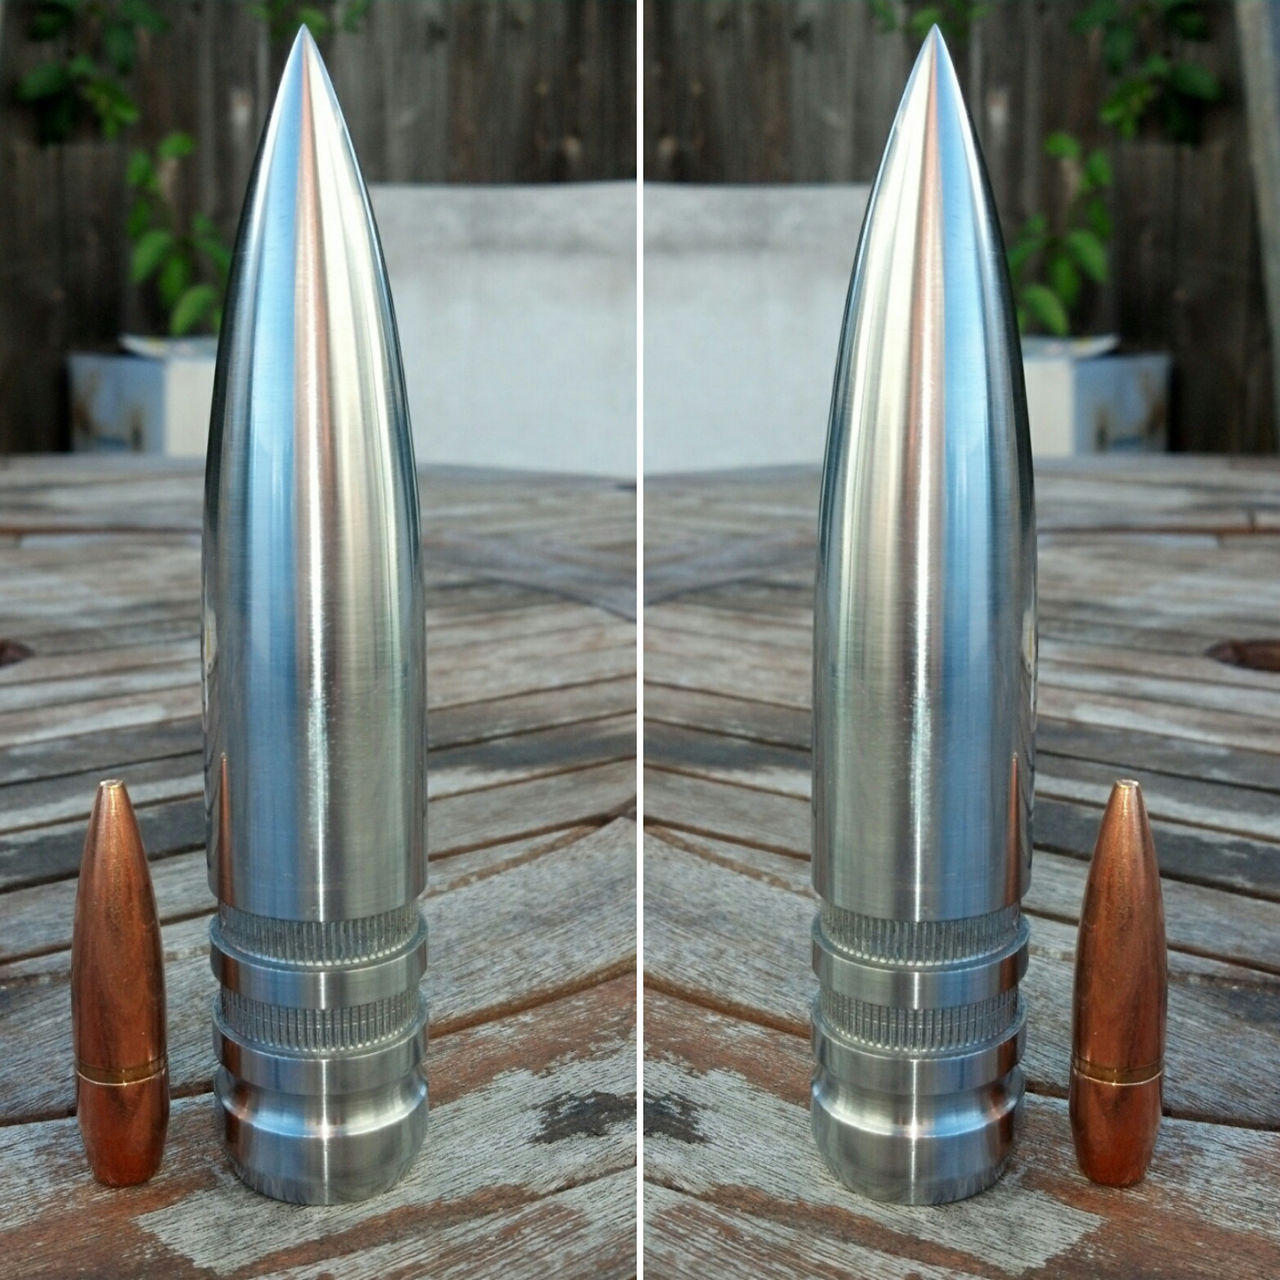  A .50 cal round compared to a  30mm shell.